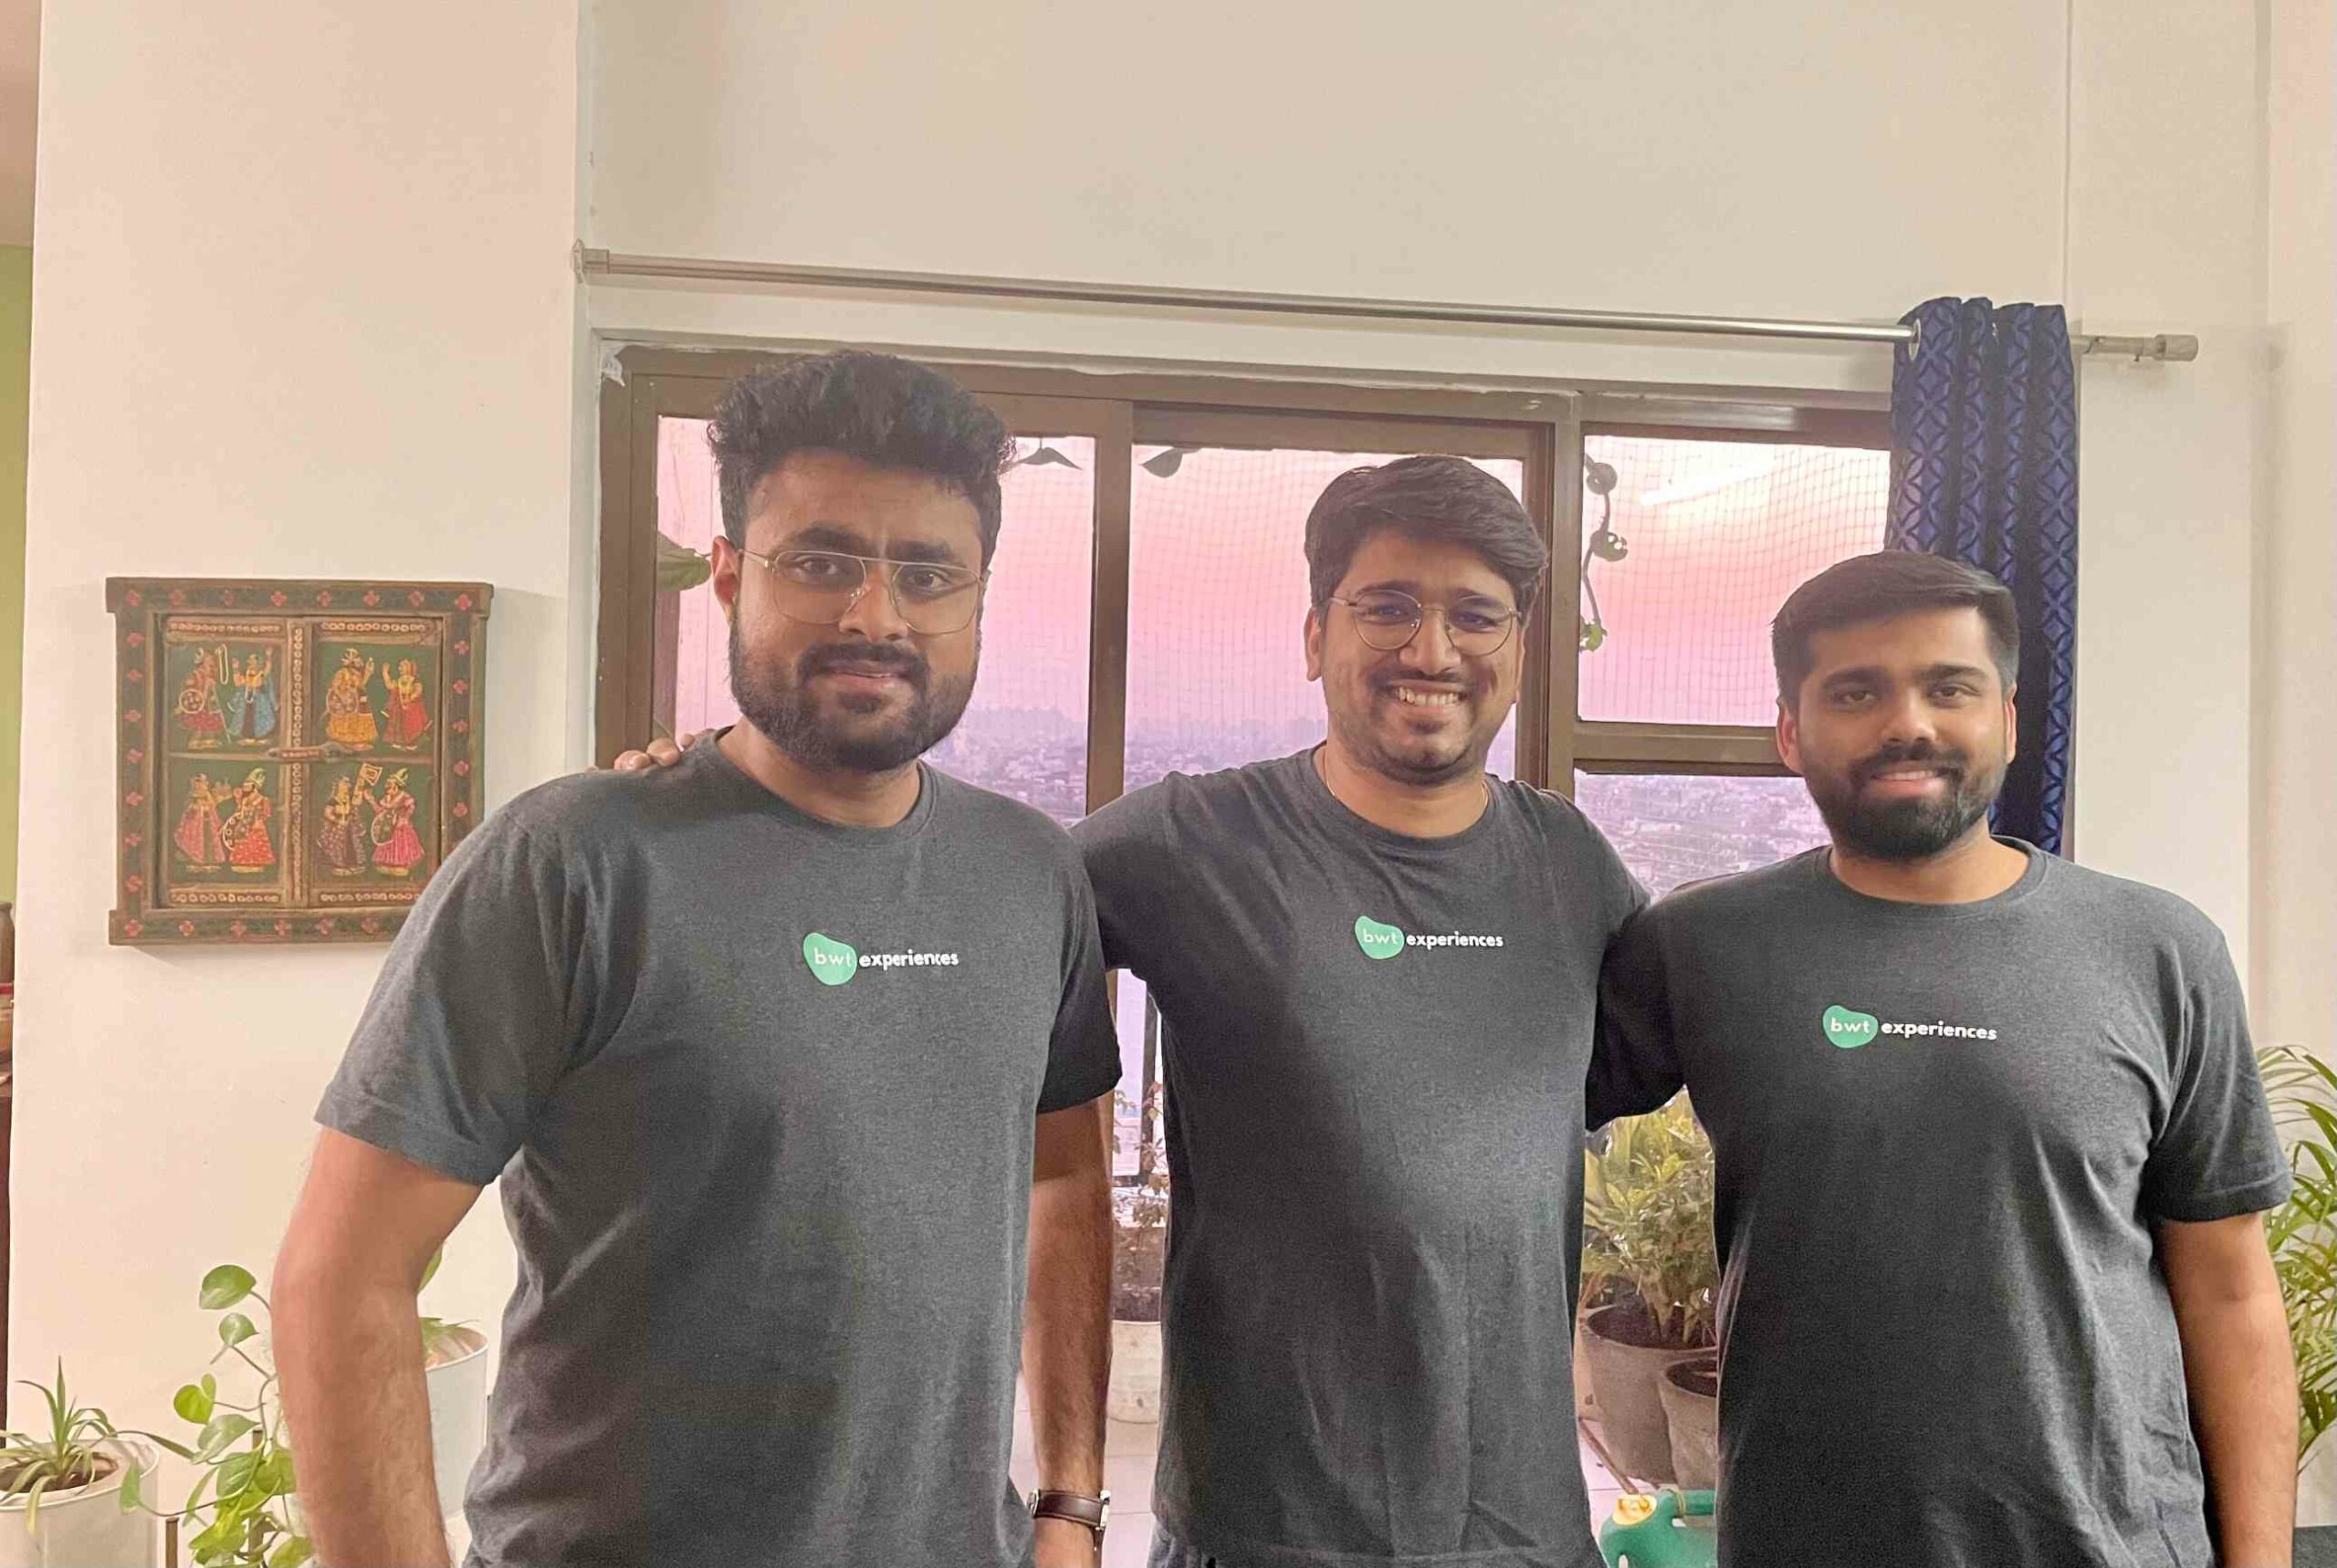 Founder of BWT, Adil Khan (left) with the two co-founders of the startup